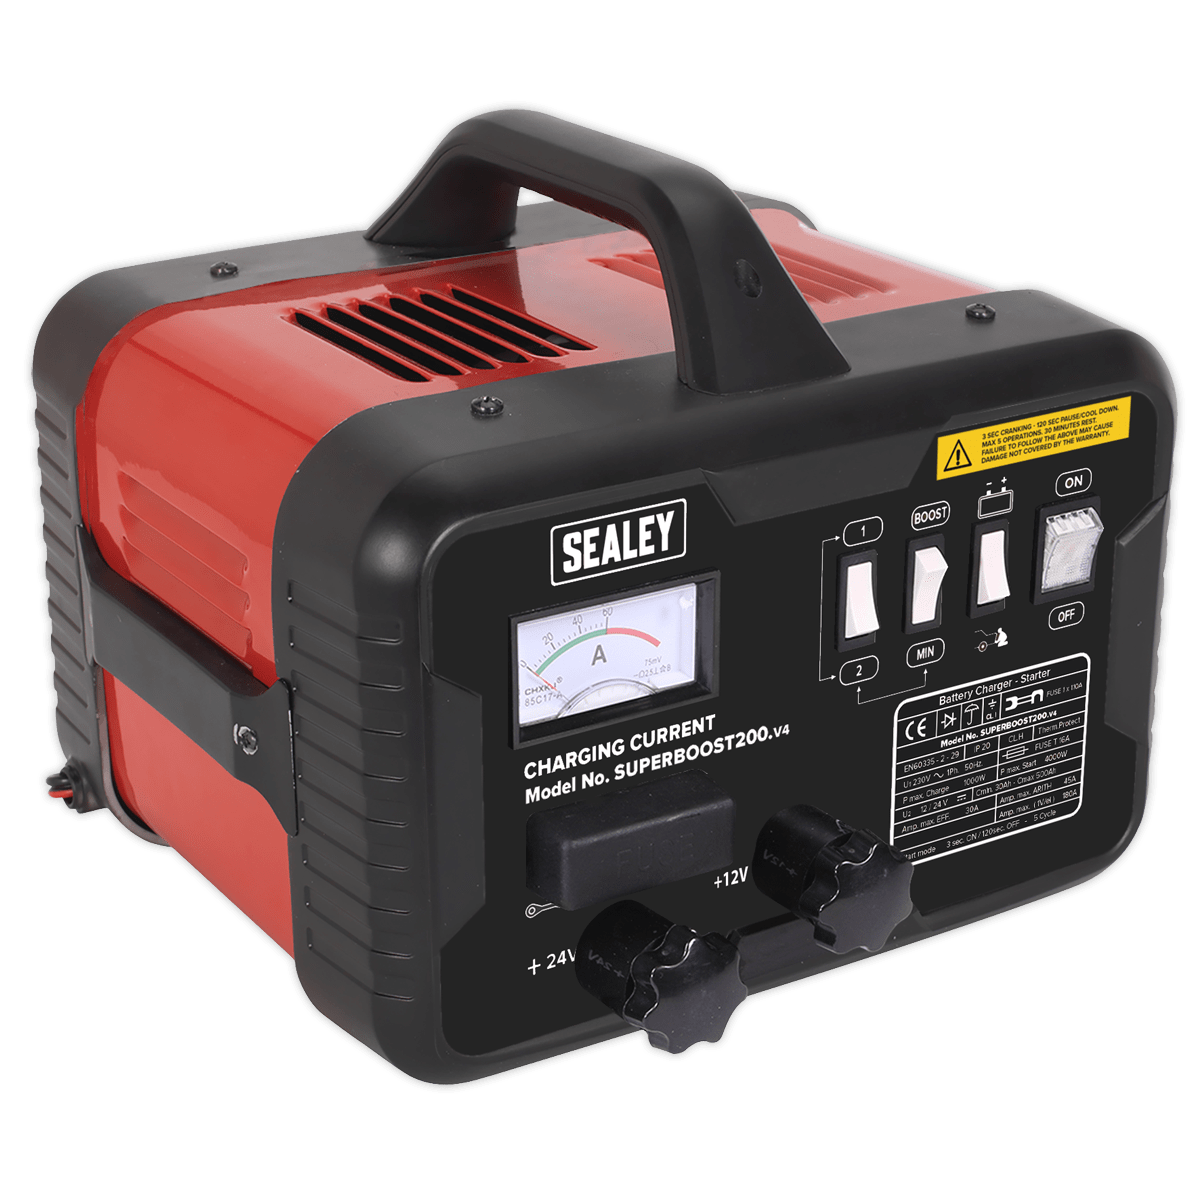 Starter/Charger 200/45Amp 12/24V 230V | Combination unit capable of both charging batteries and providing boost power to help start vehicles with flat batteries. | toolforce.ie